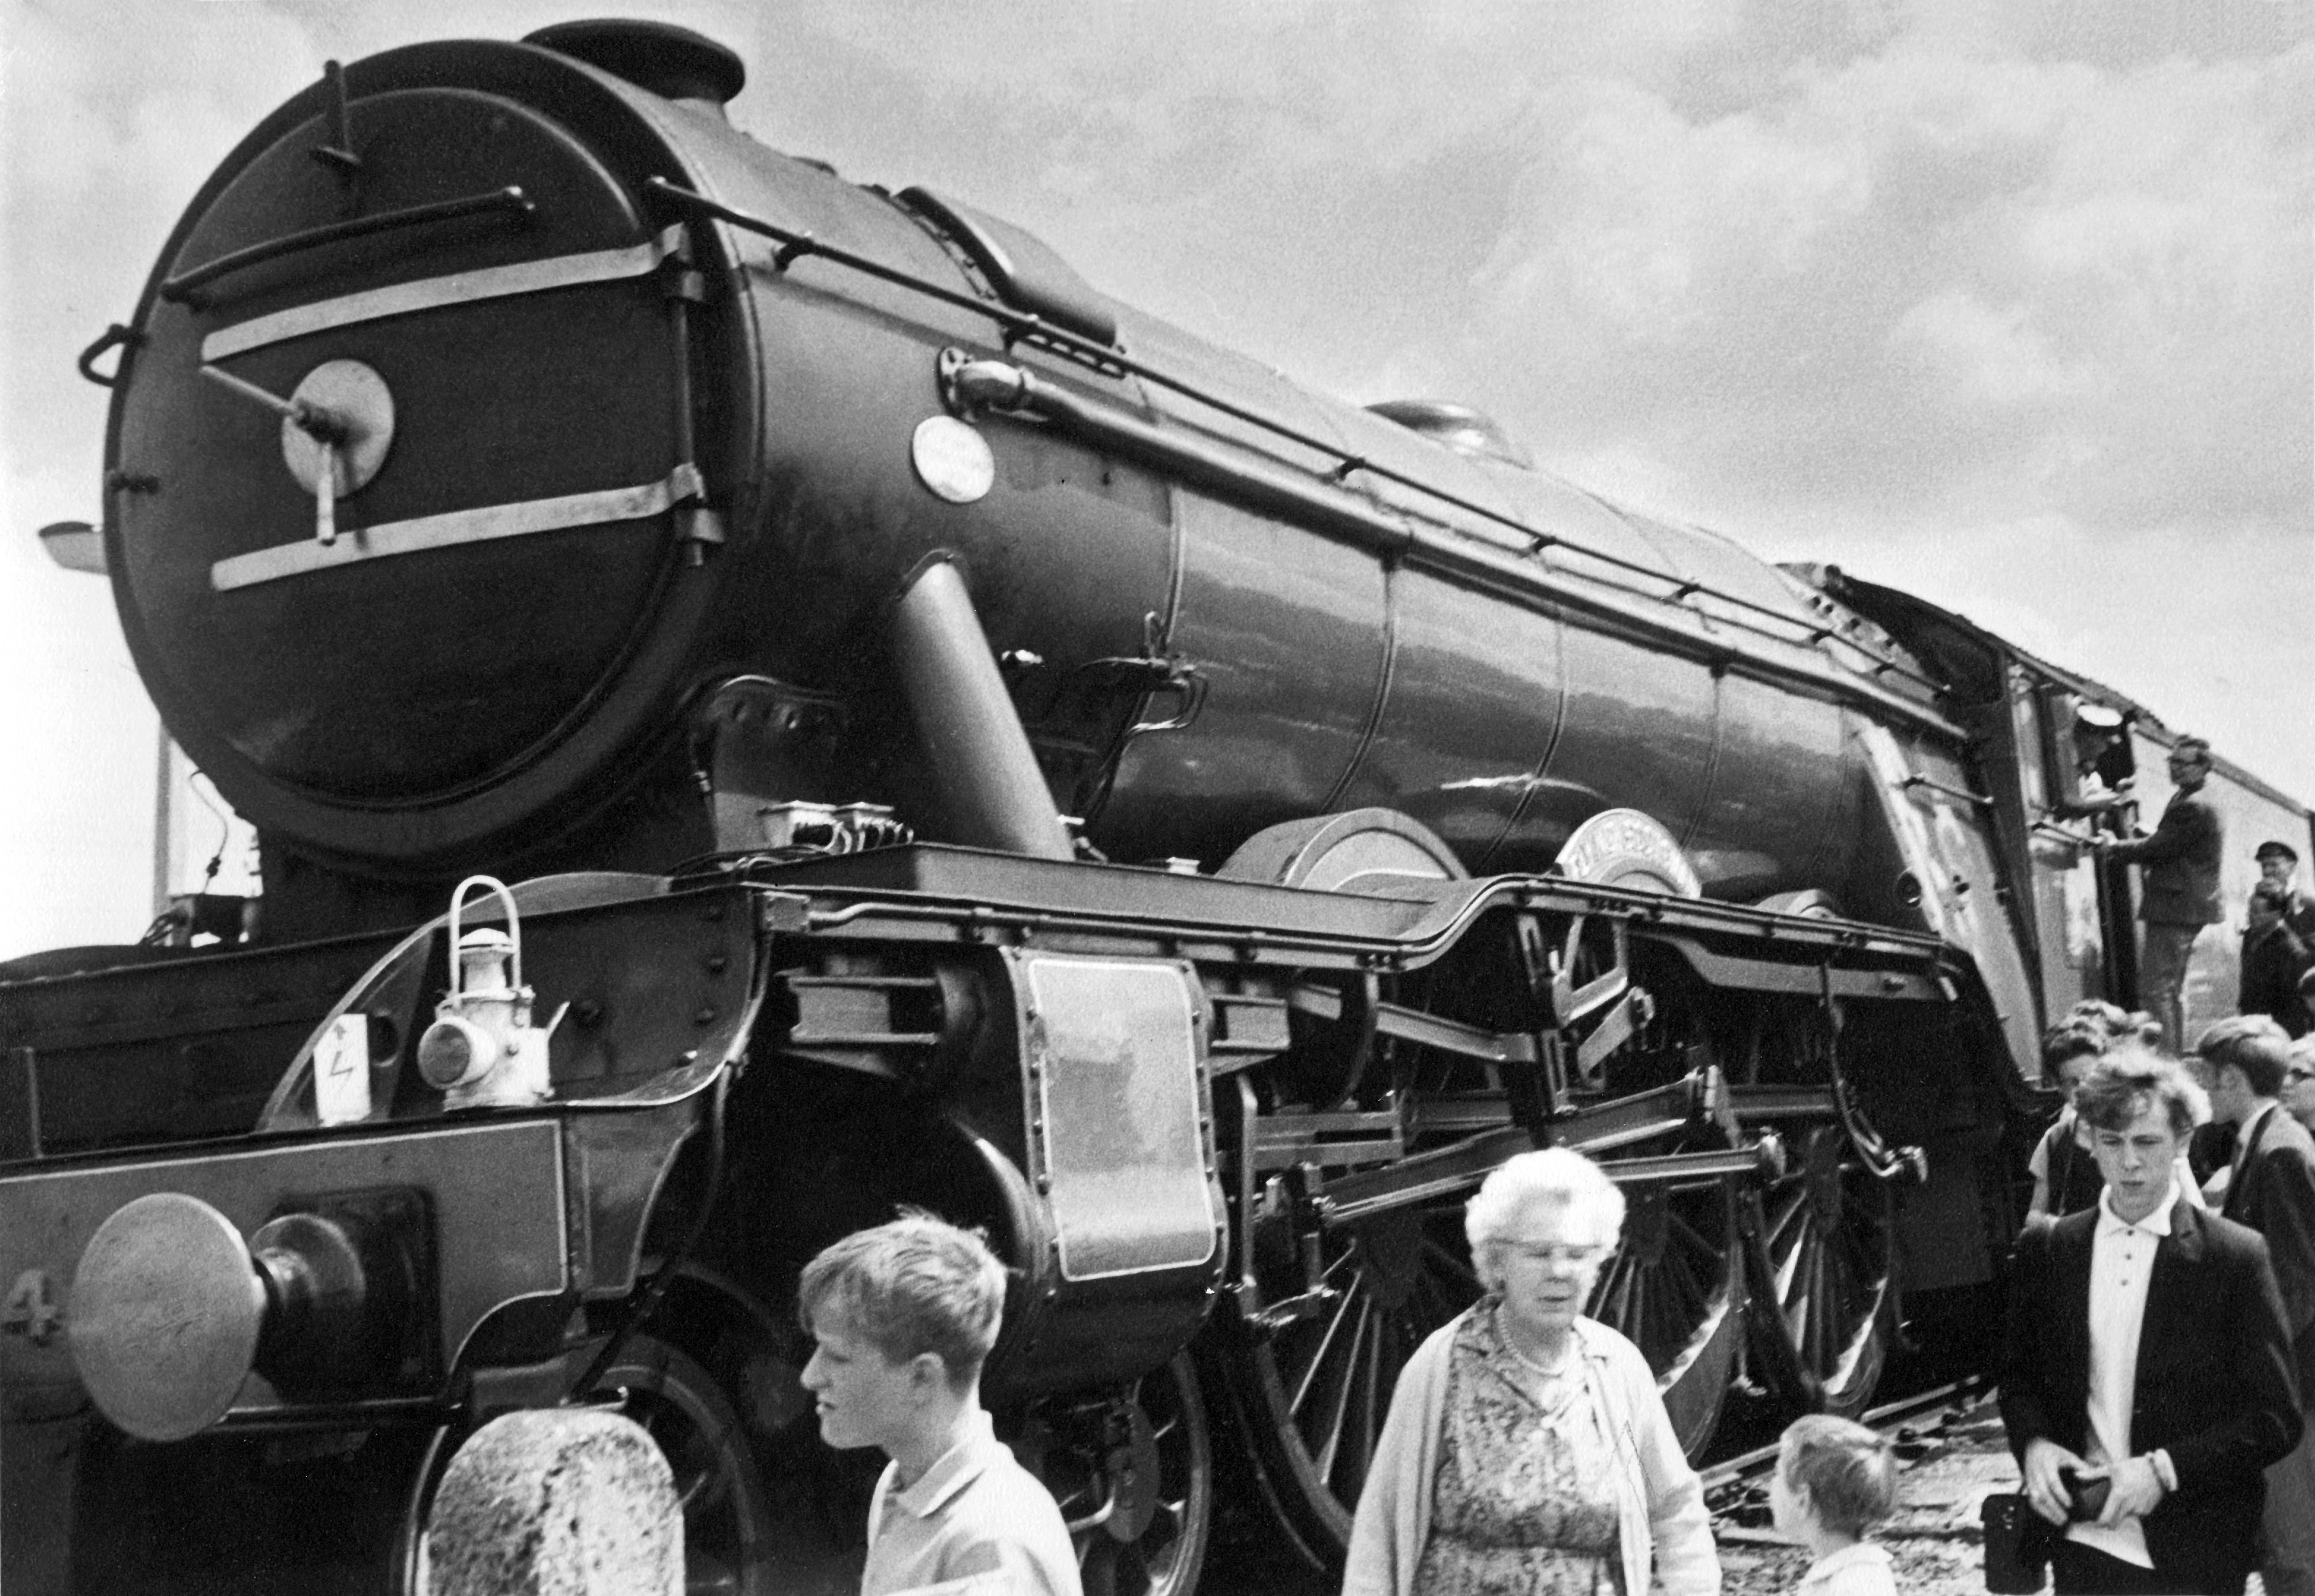 No.4472 'Flying Scotsman' at Grantham station. Photograph lent By Ken Willetts.